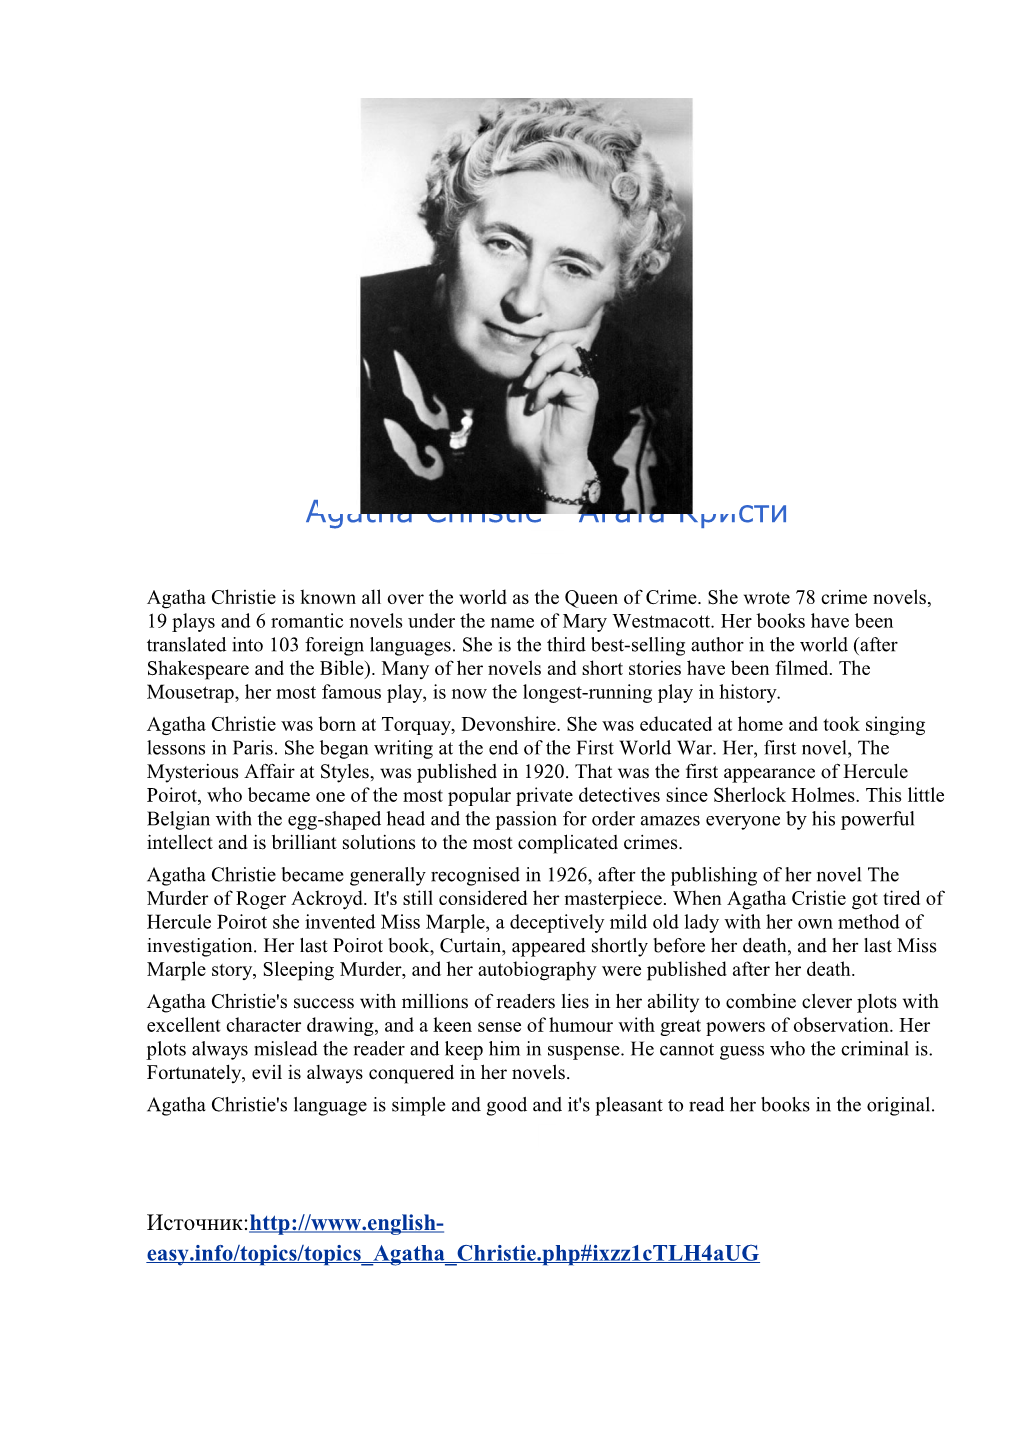 Agatha Christie Is Known All Over the World As the Queen of Crime. She Wrote 78 Crime Novels